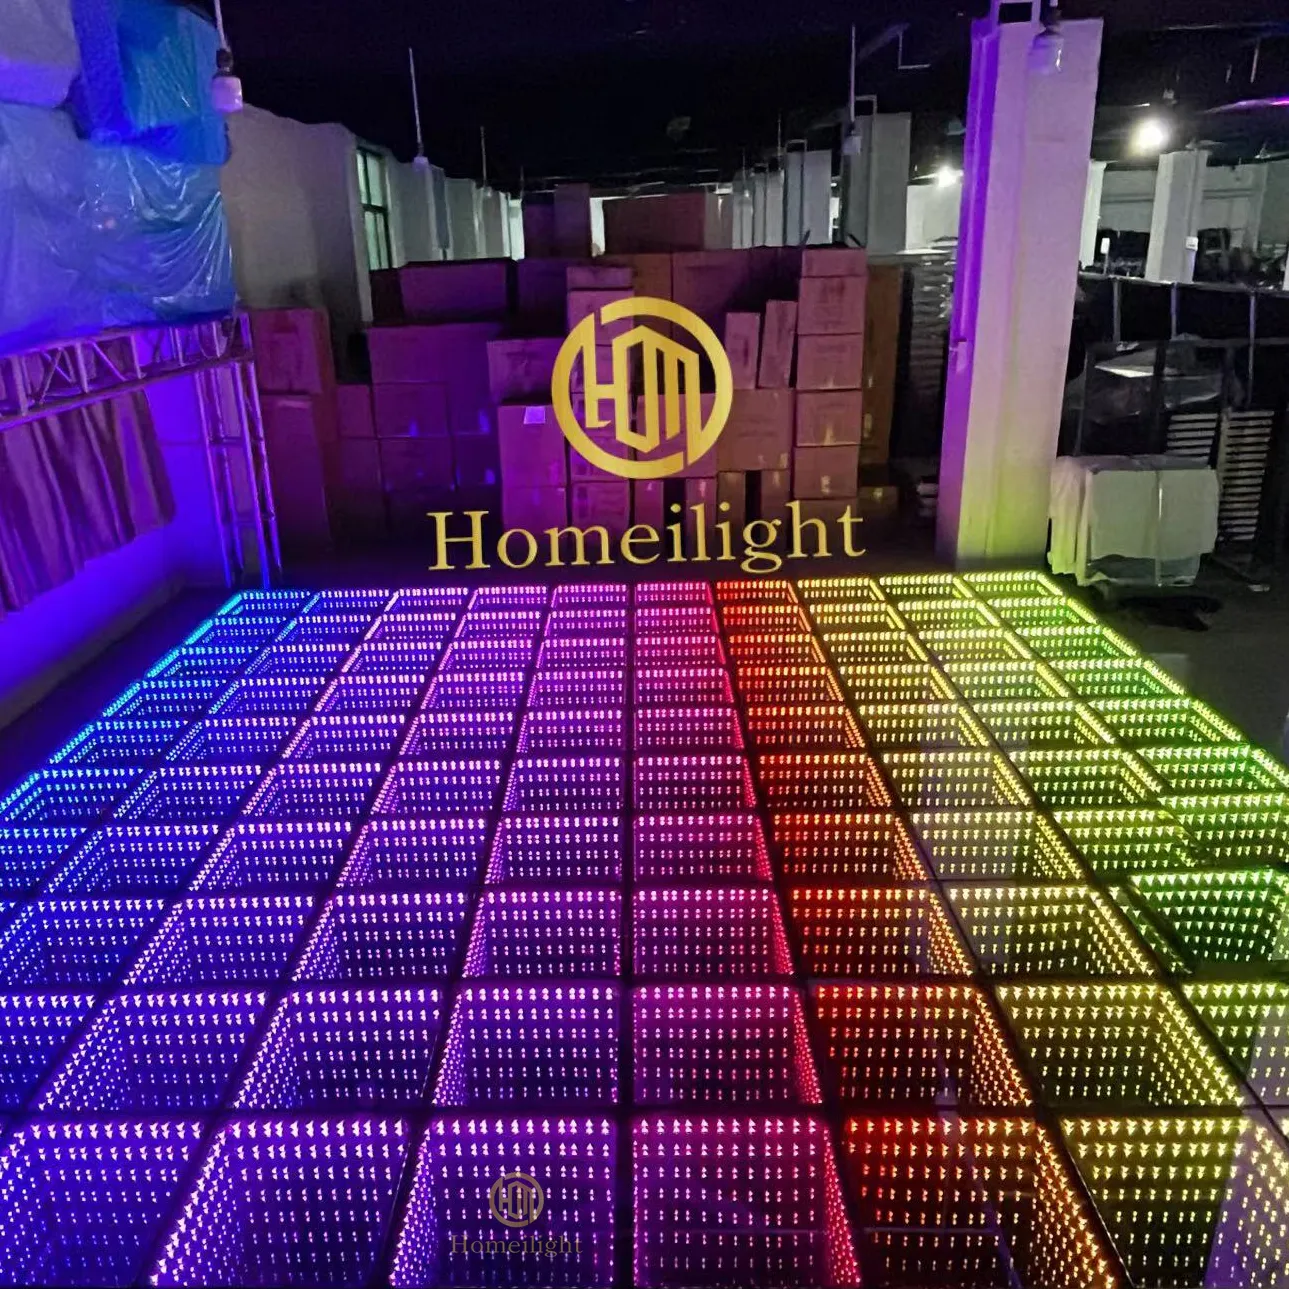 Hot Sale Interactive Magnetic 3D LED Dance Floor Stage lights for party lights dj bar holiday wireless christmas decoration